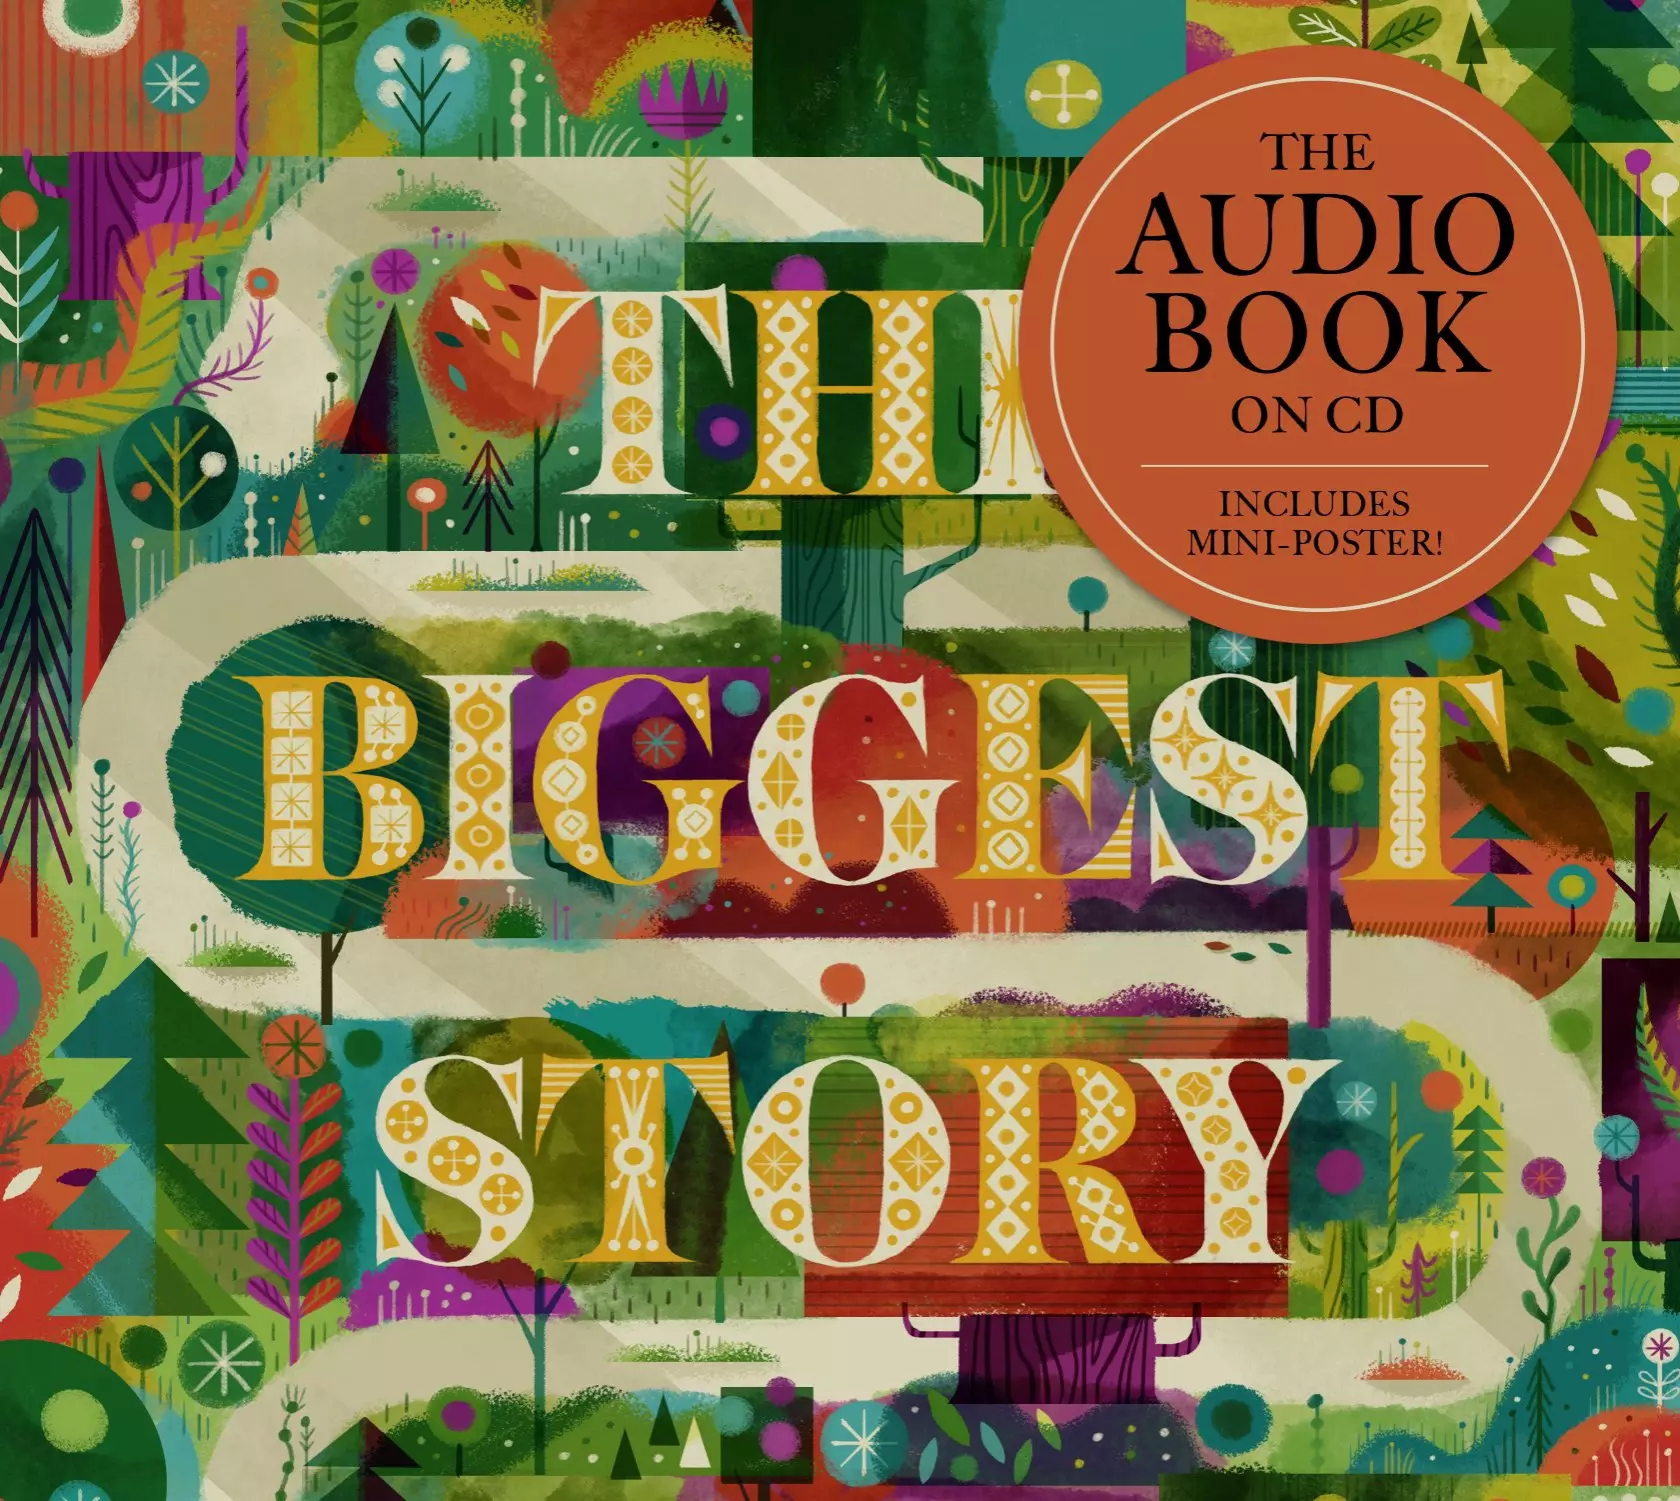 The Biggest Story Audio CD